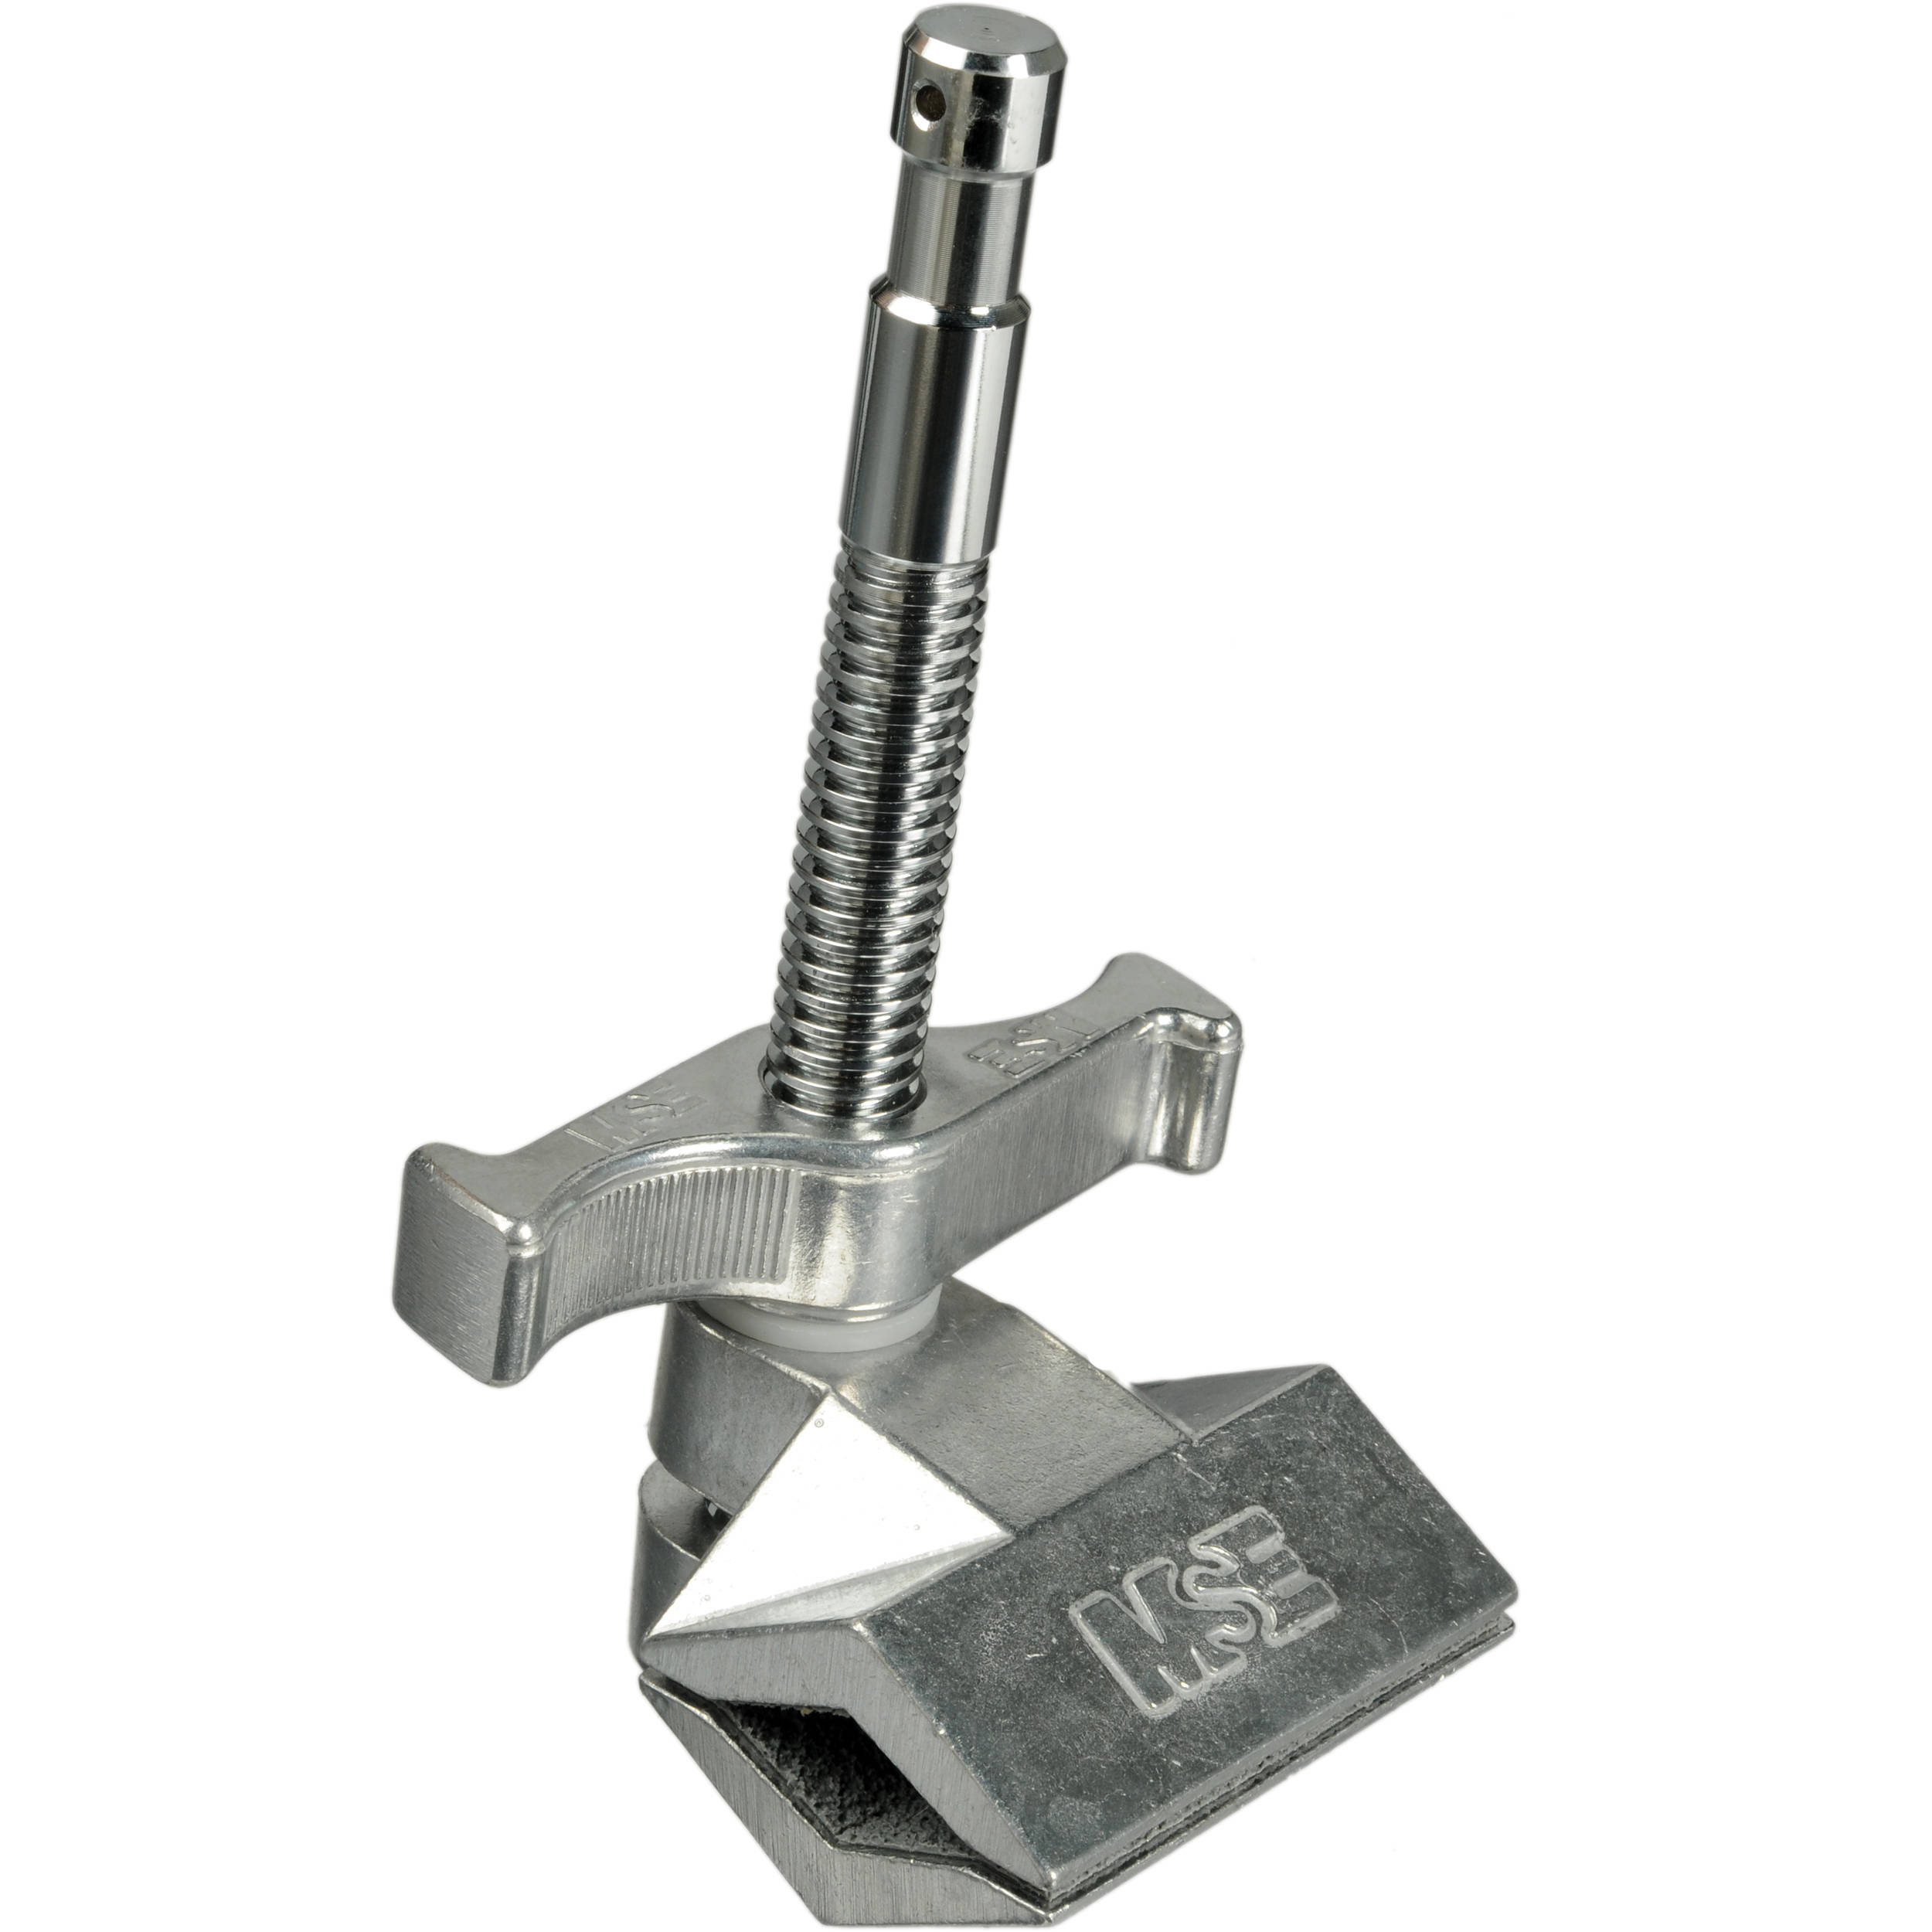 Matthellini Clamp 2″ End Jaw